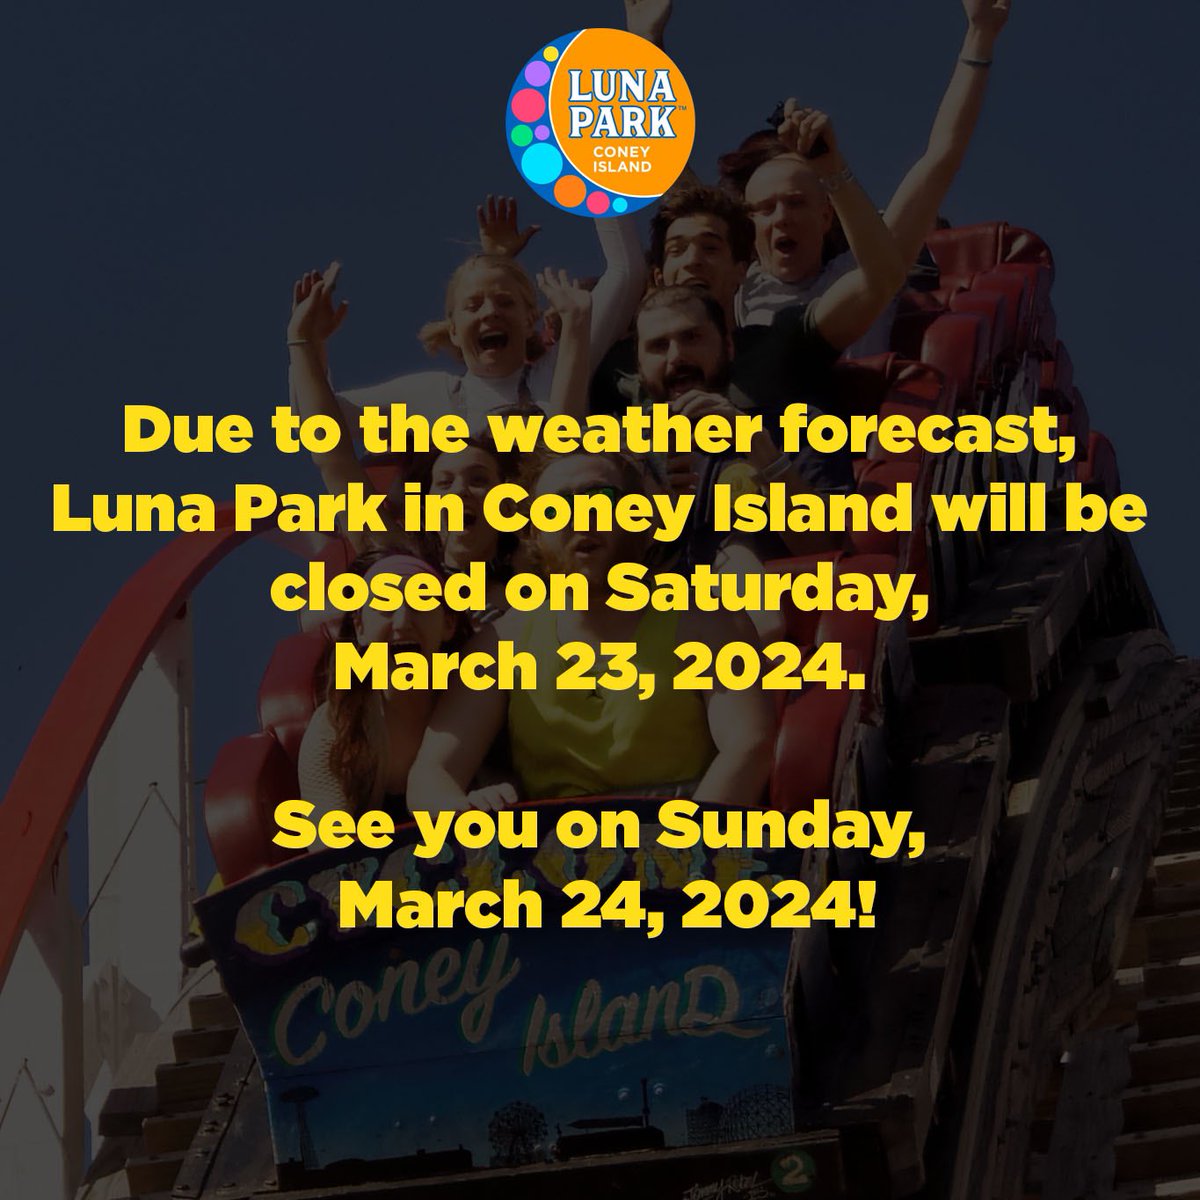 🌙✨ Luna Park in Coney Island will be closed Saturday, March 23 due to the forecasted weather. 🎪Extraordinary FUN begins on Sunday March 24, 2024 ! 🥳🎉 🎢 Buy your Extraordinary Wristbands online today! #lunaparknyc #coneyisland #extraordinary